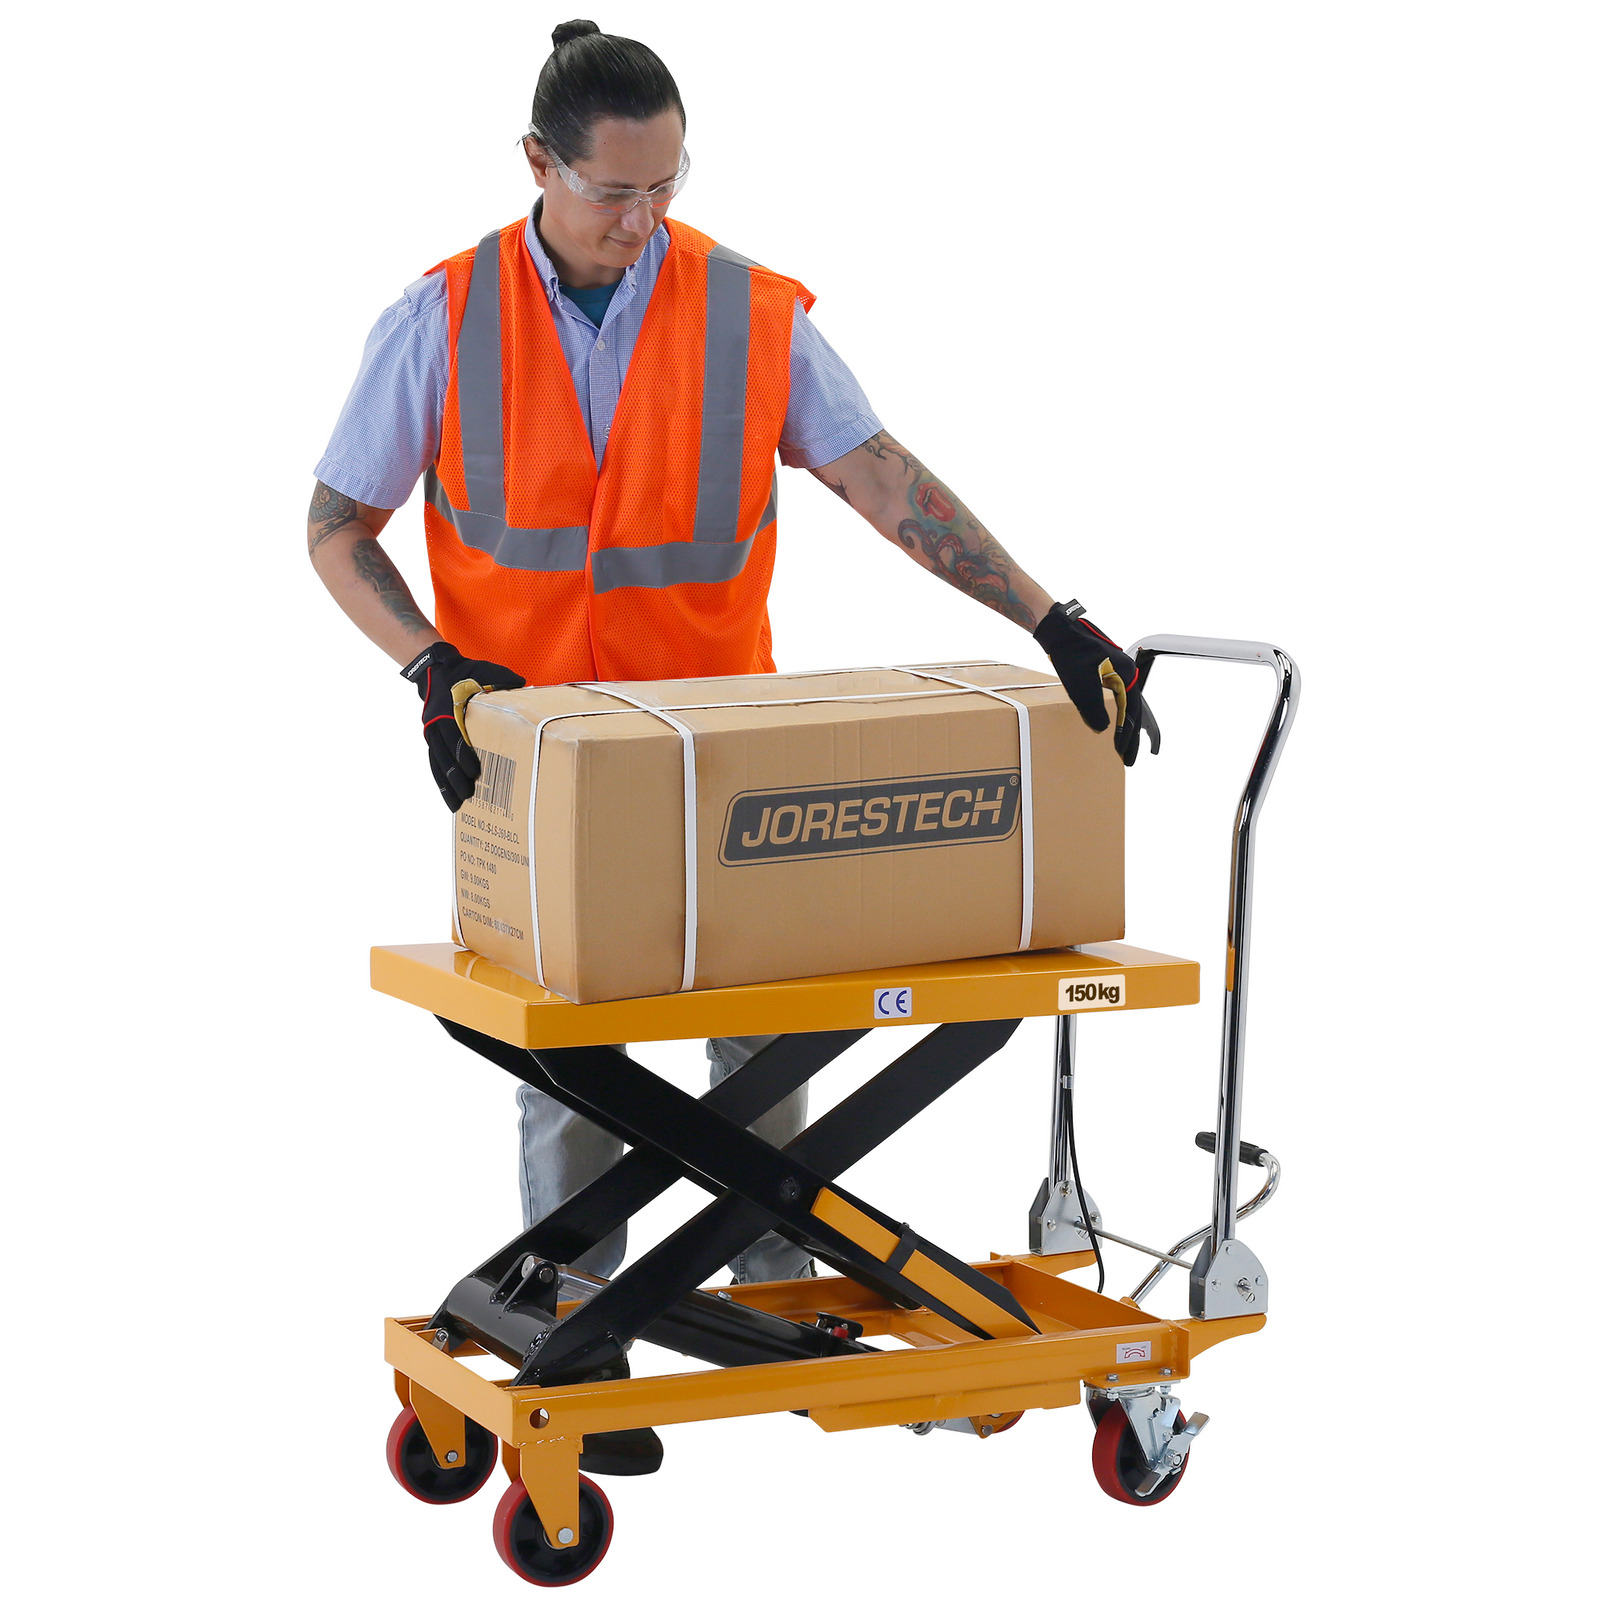 A man wearing an orange safety vest is removing a heavy box from the table lift at a comfortable height because the table is lifted